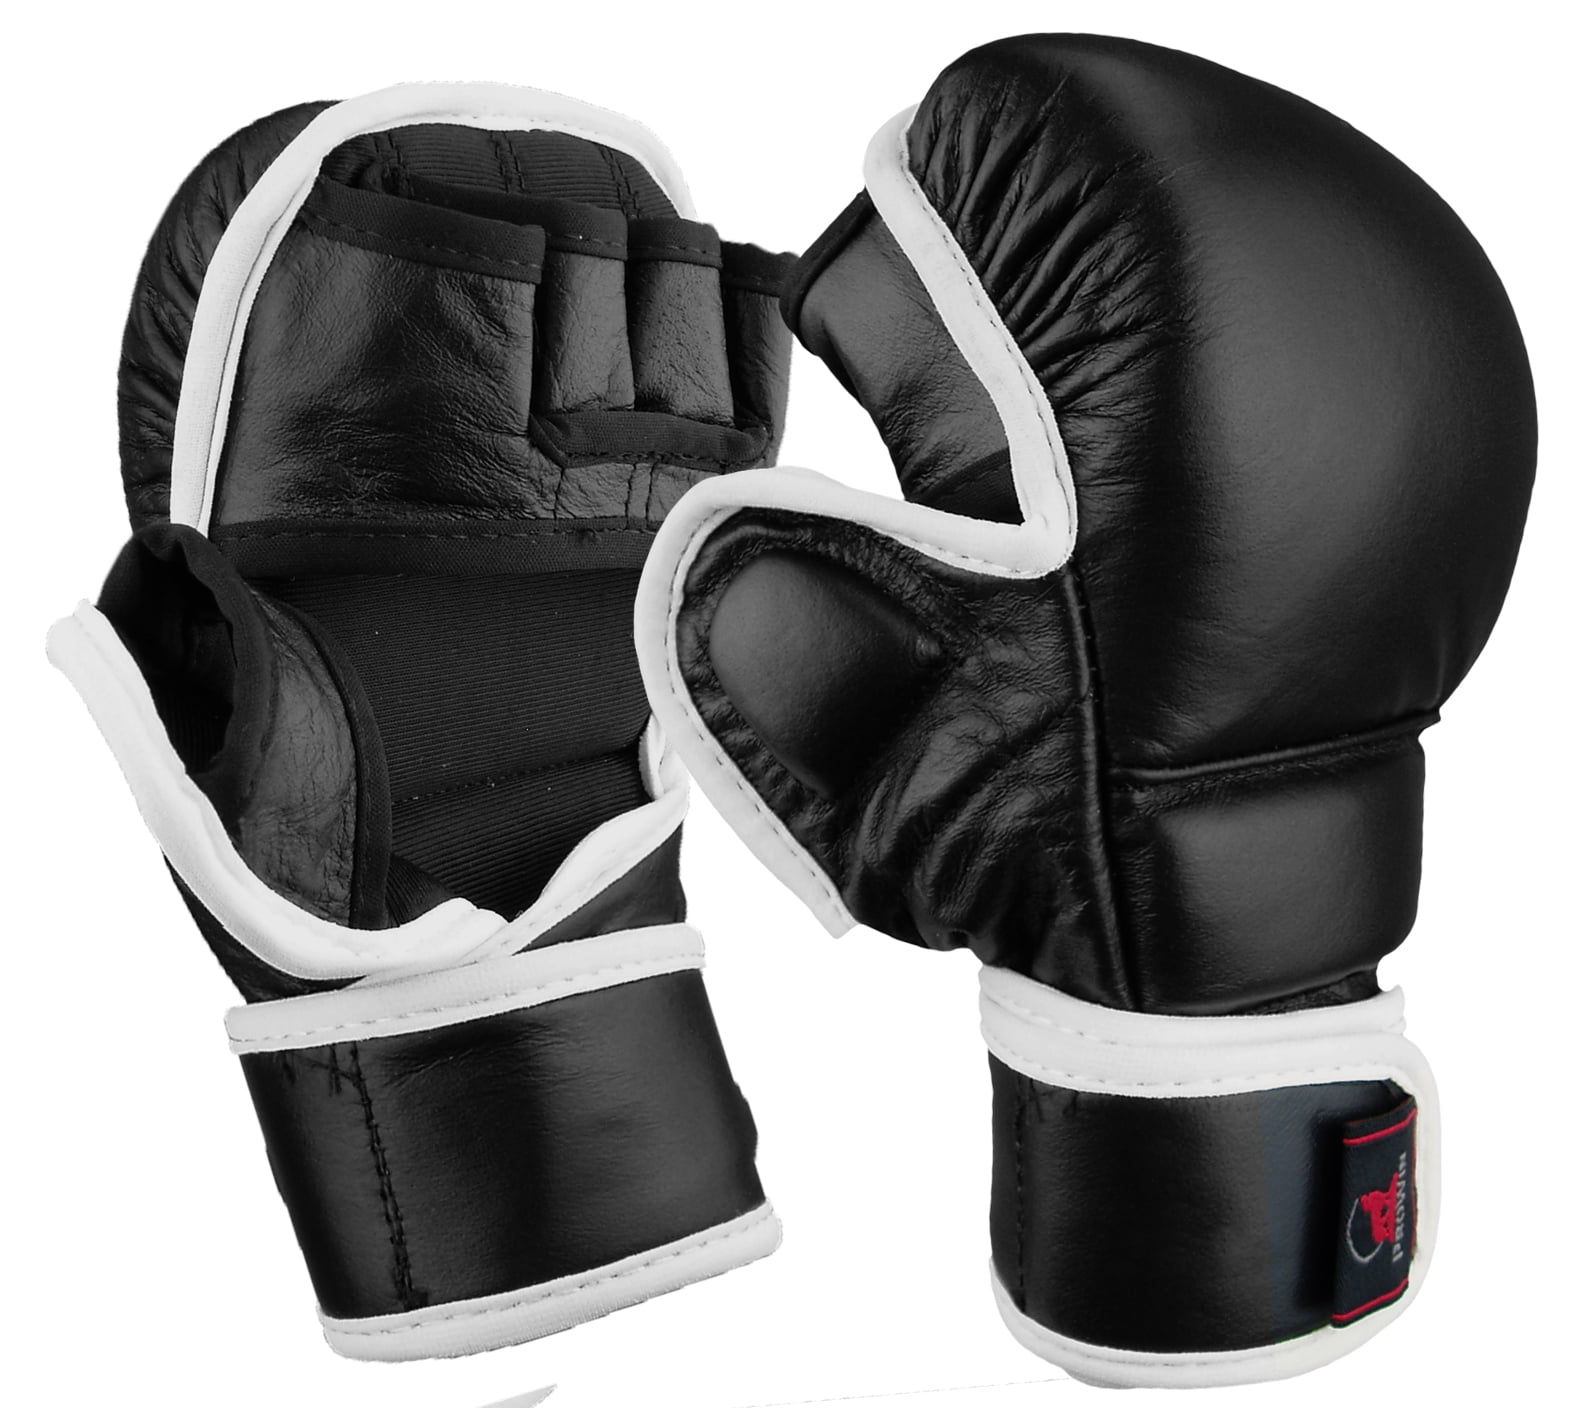 AG Pro Leather Boxing Gloves,MMA,Sparring Punch Bag Muay Thai Training Gloves 